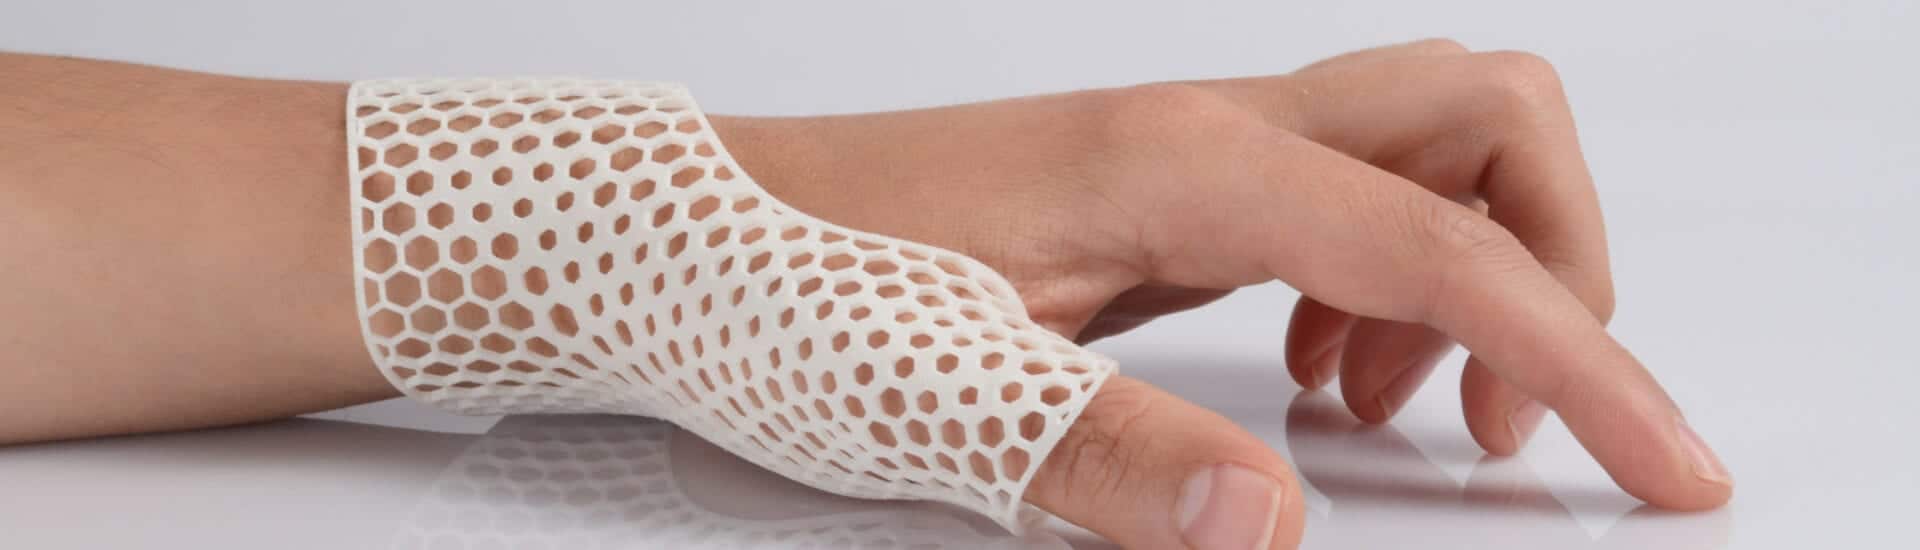 PA1101 Orthosis Hand With Hand - EOS Oceanz